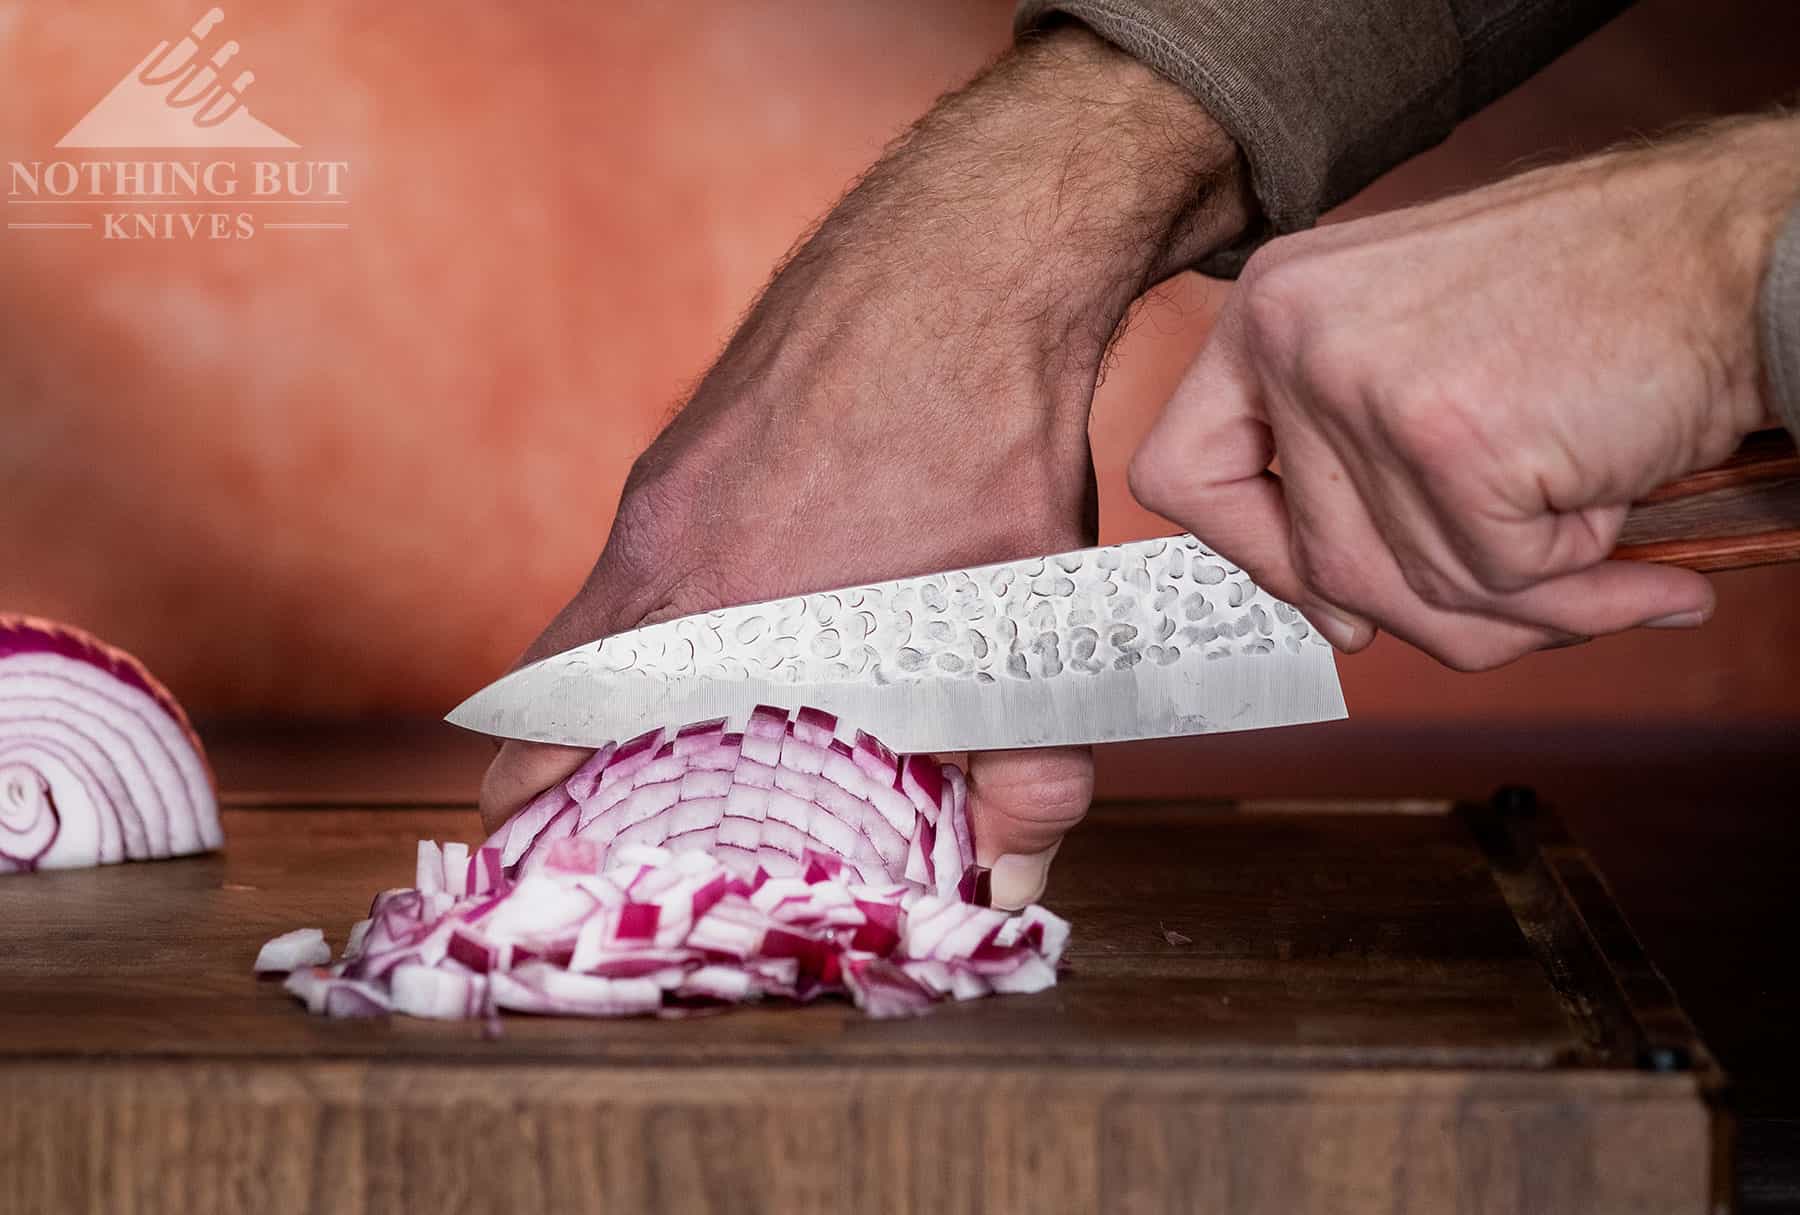 The 8.3 inch Katsune gyuto chef knife is an affordable professional Japanese chef knife that can be bought on its own or as part of a set.